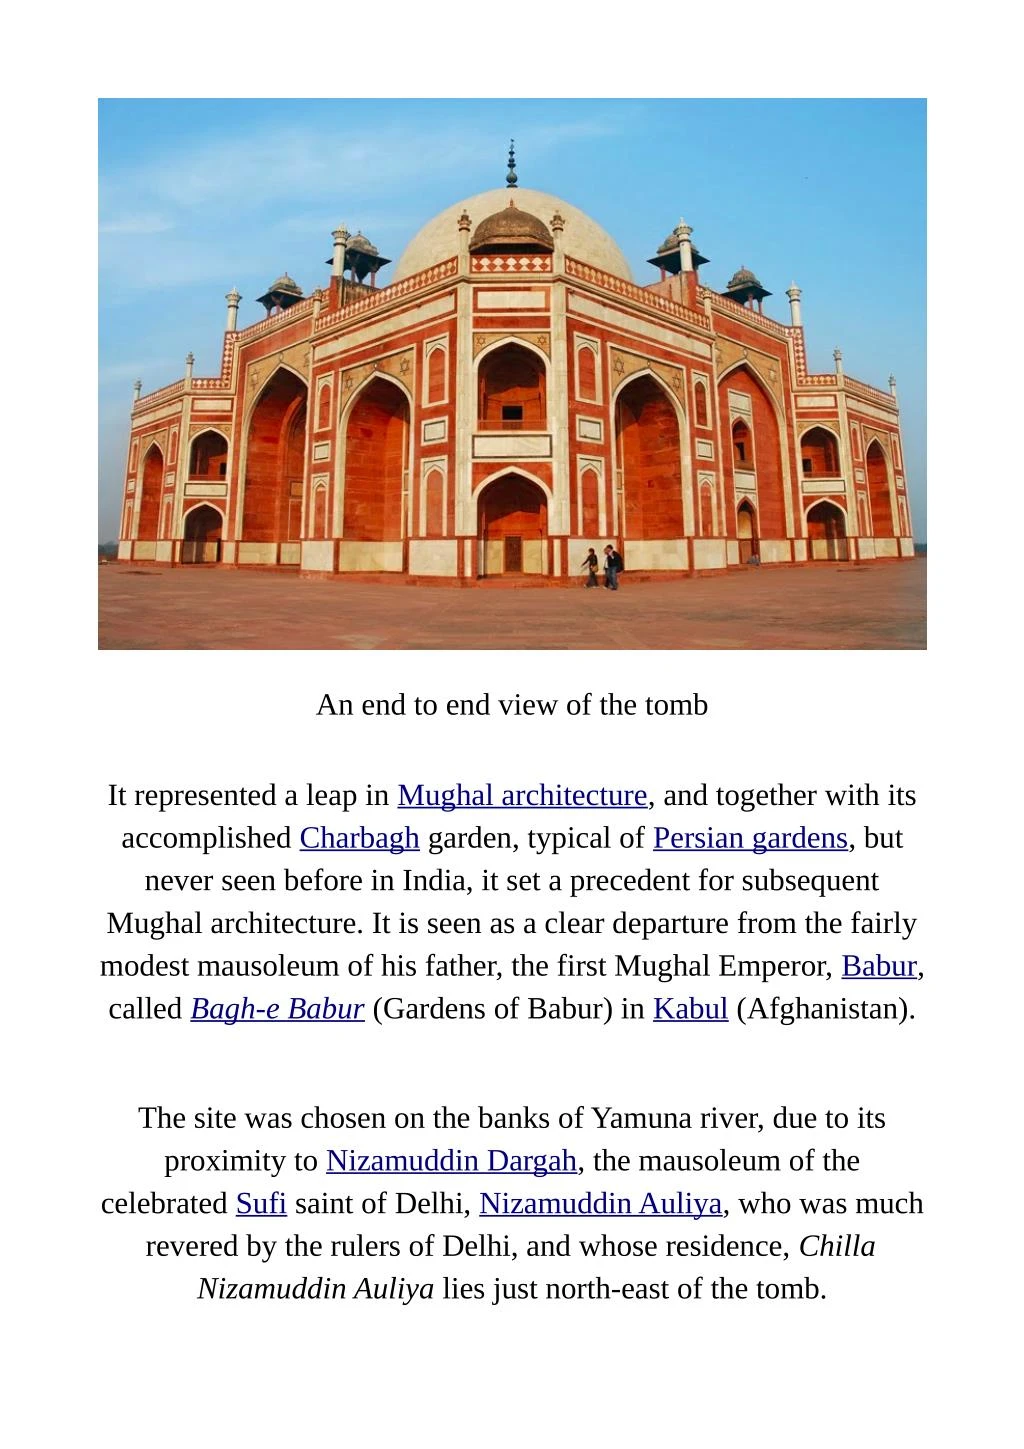 PPT - Humayun's Tomb The Most Beautiful Tomb in Delhi PowerPoint ...